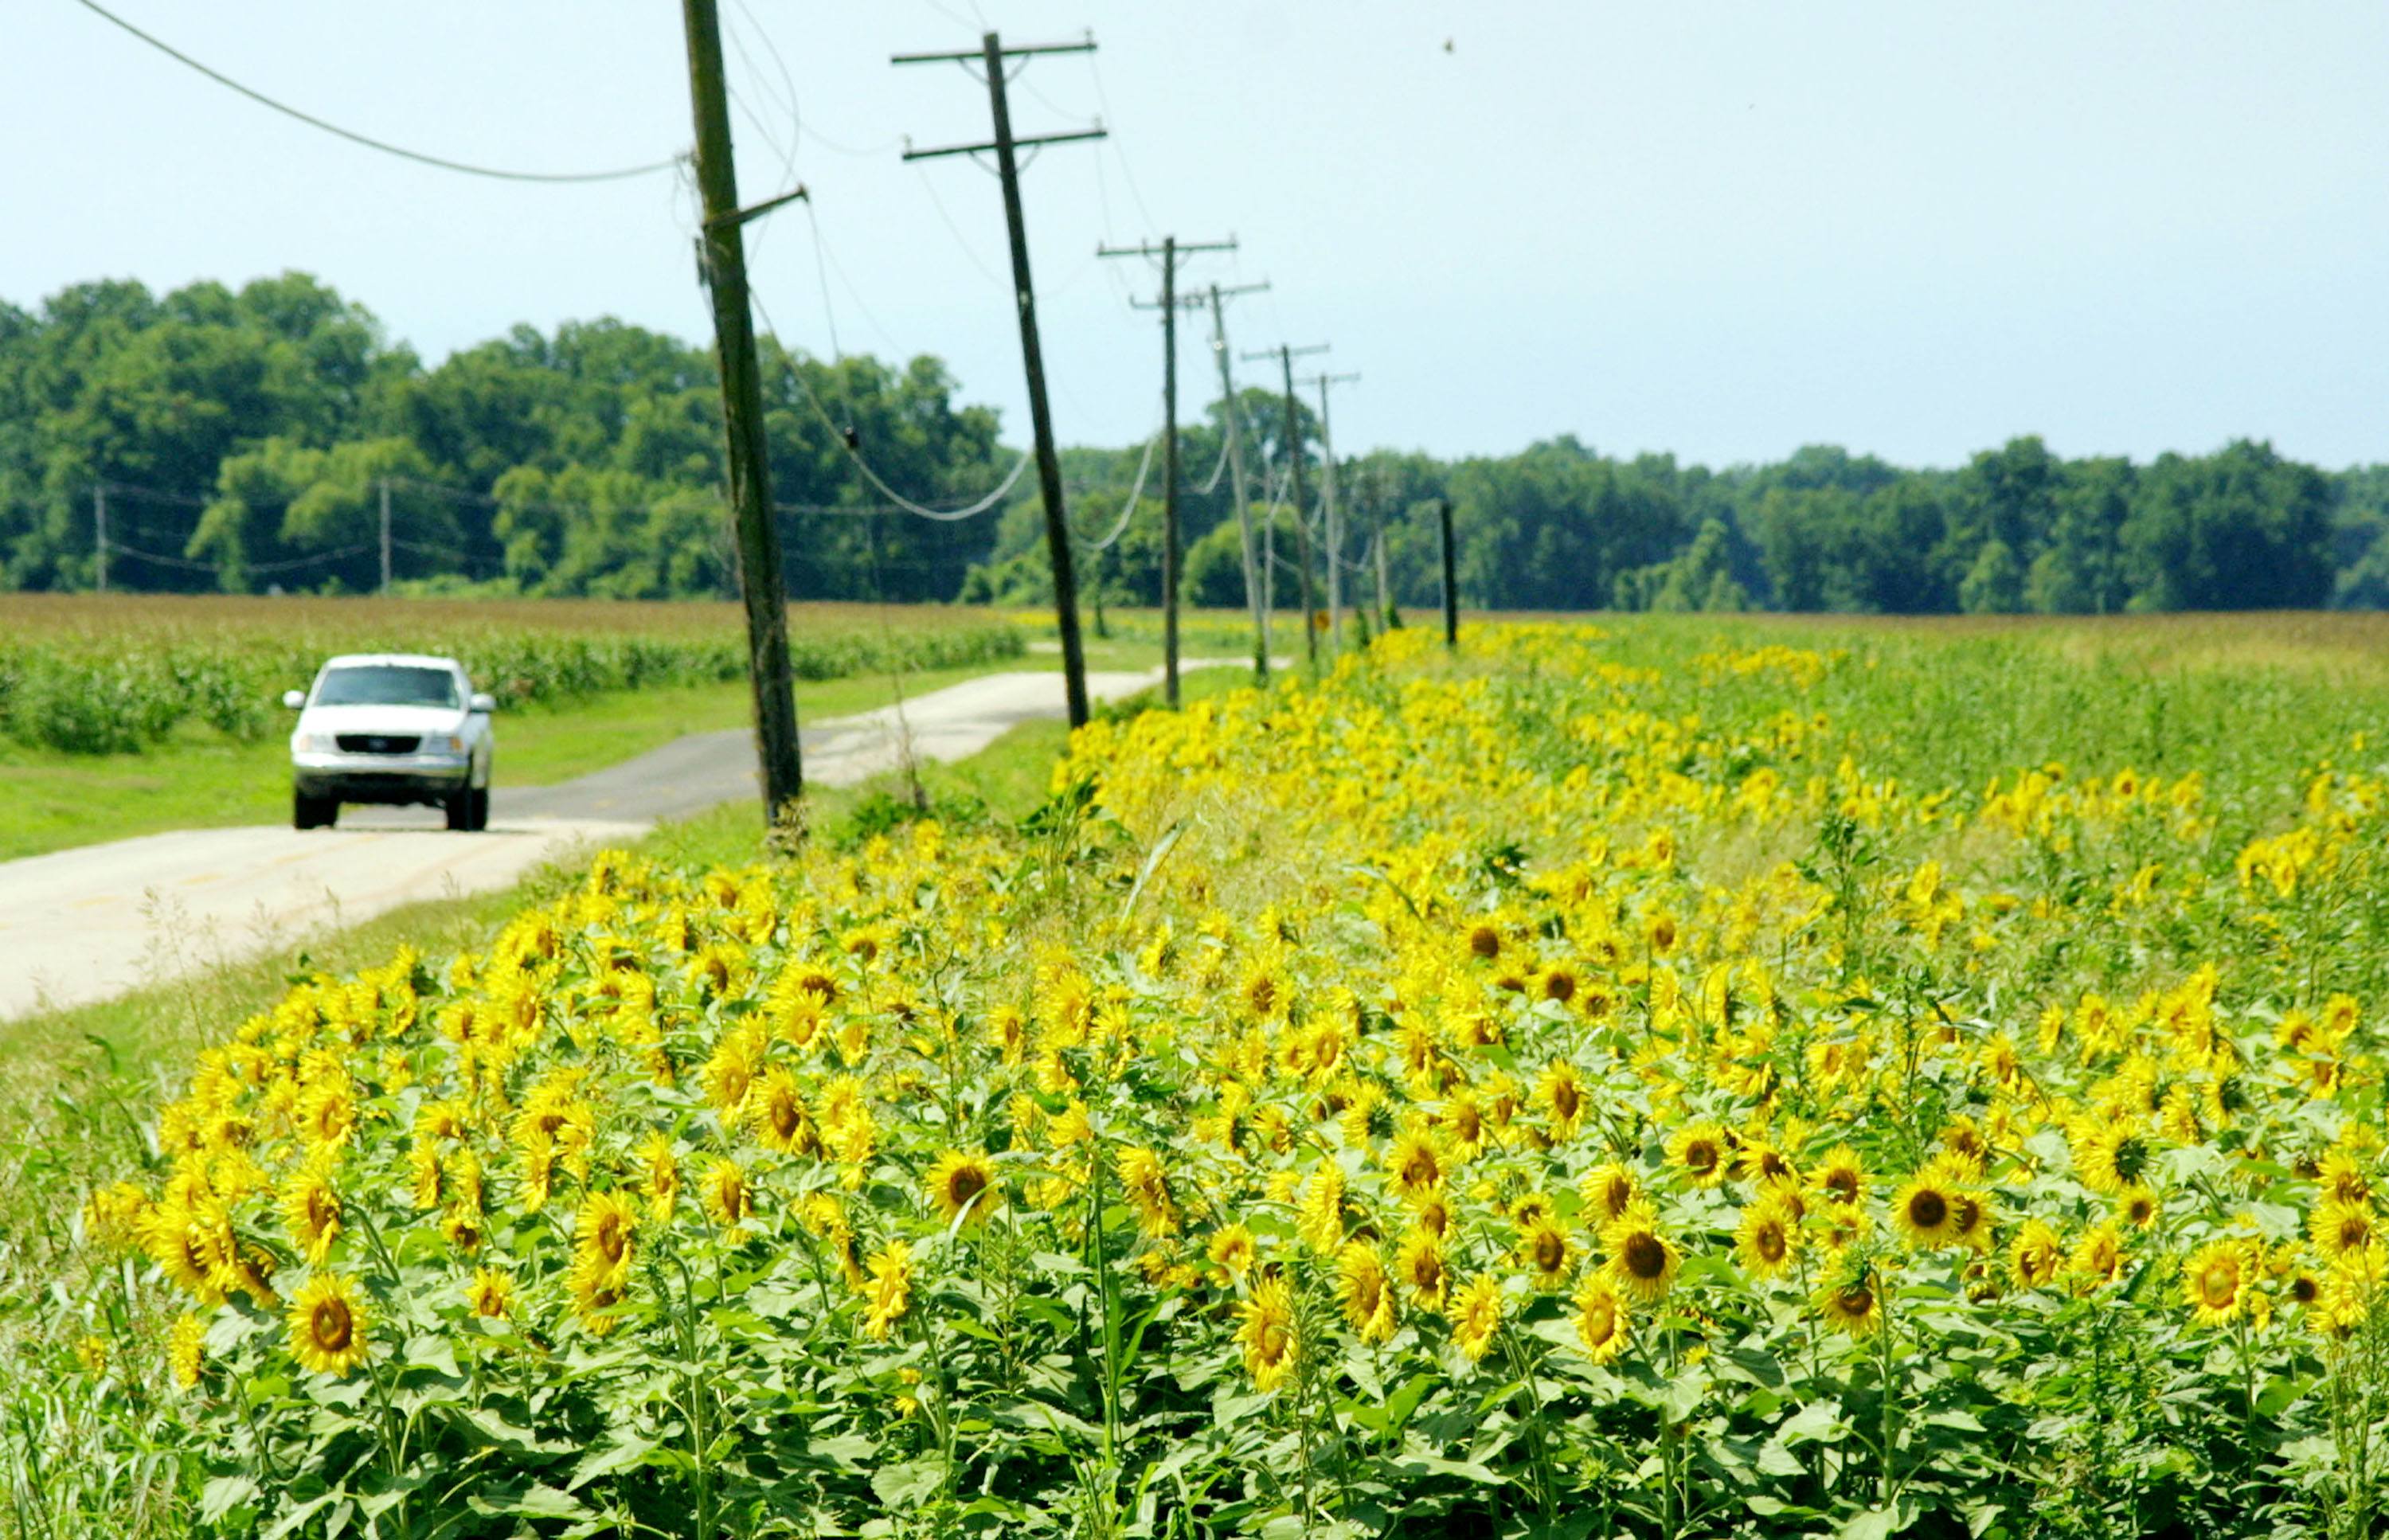 Thousands of sunflowers line a country road north of Shreveport, Louisiana